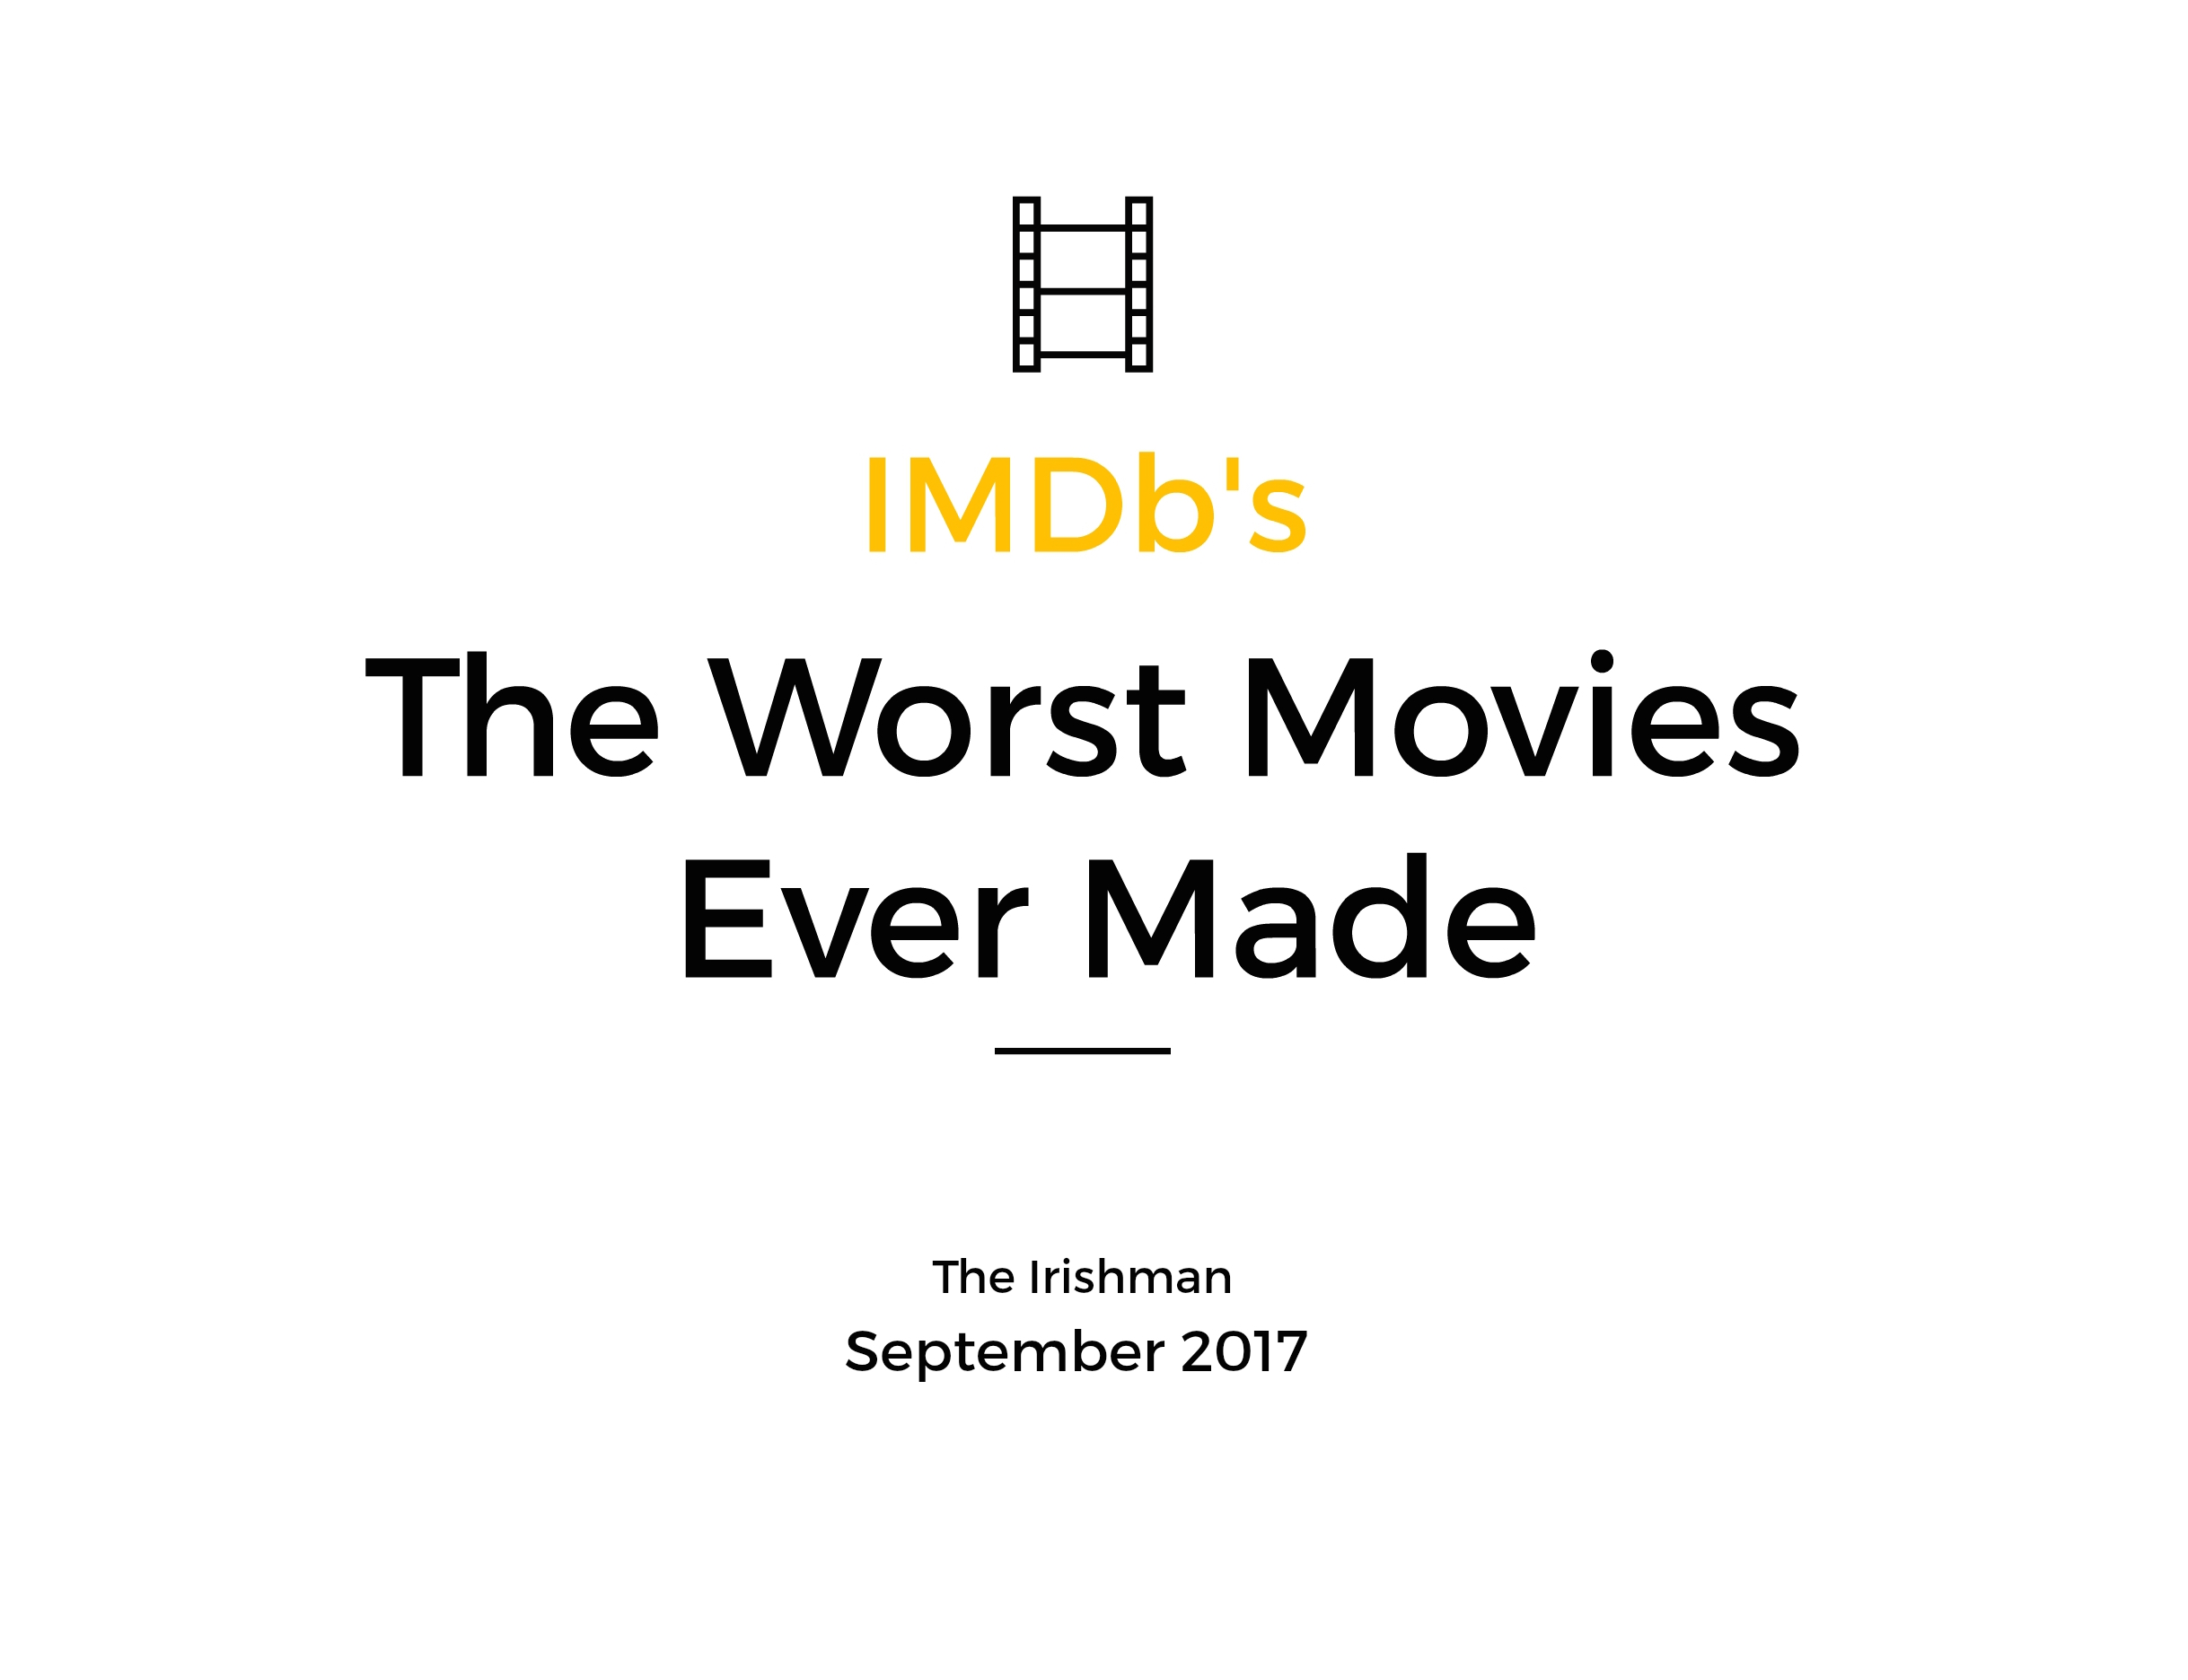 The worst movies ever made